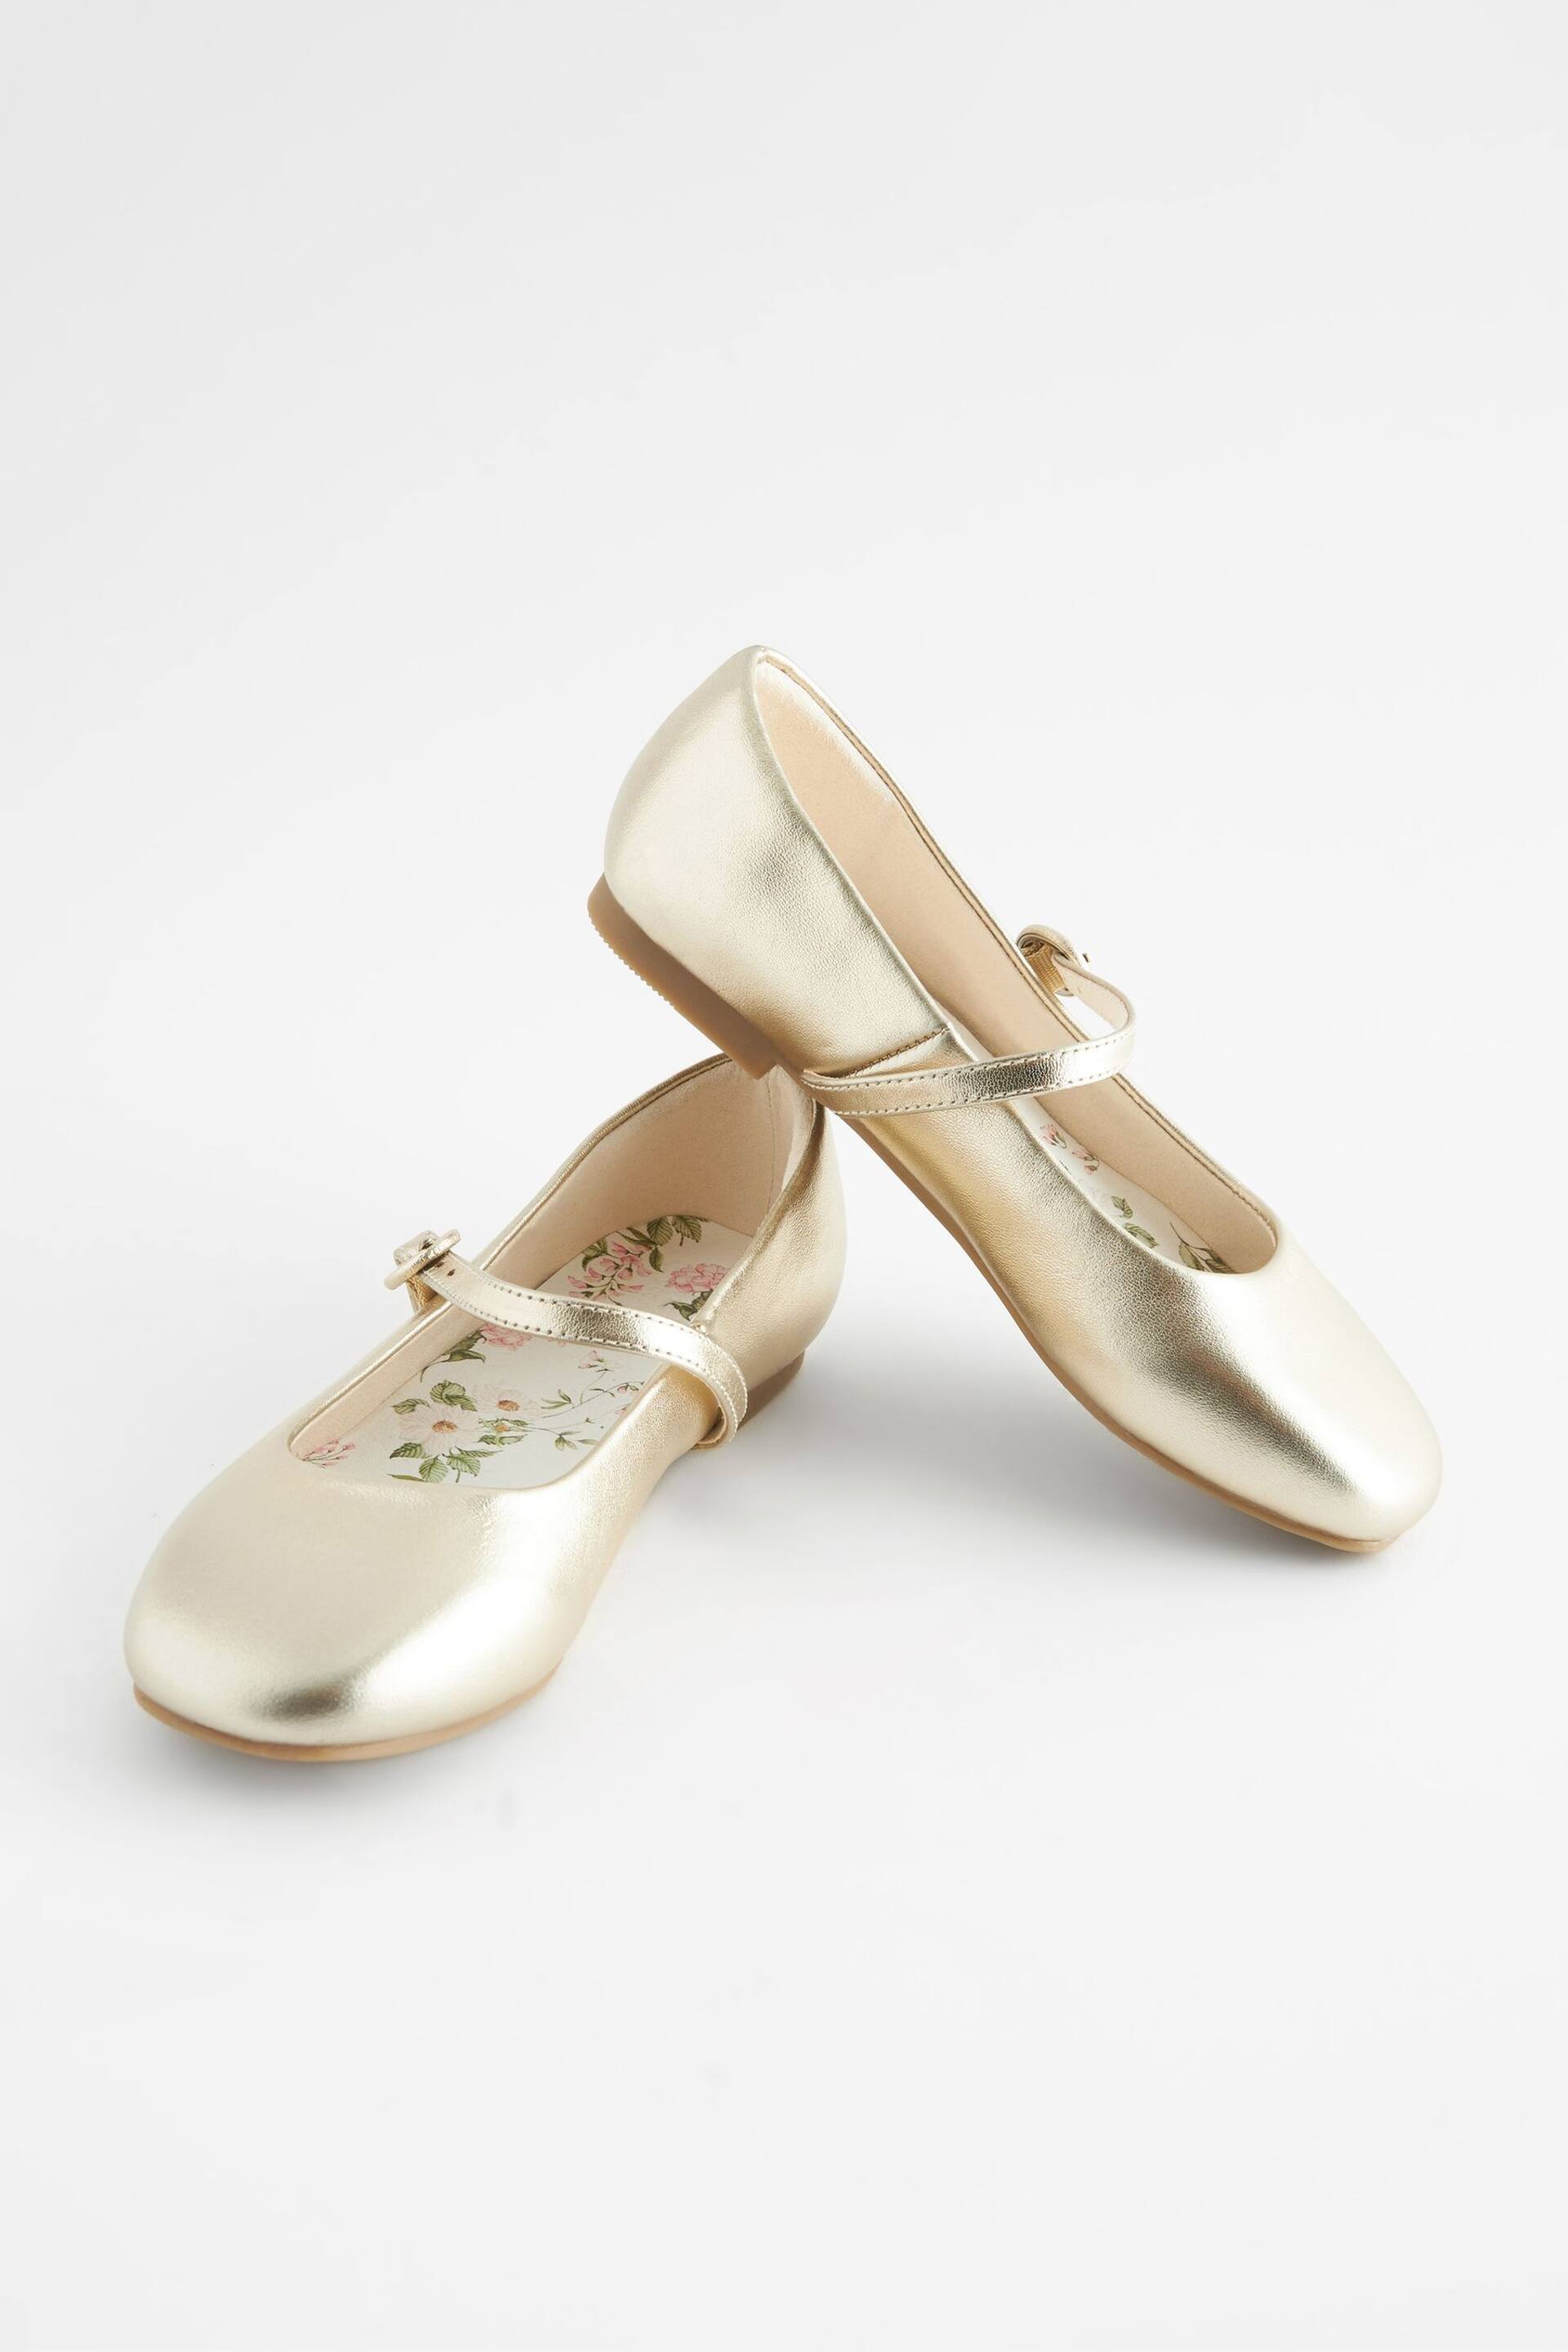 Gold Metallic Leather Mary Jane Occasion Shoes - Image 1 of 6